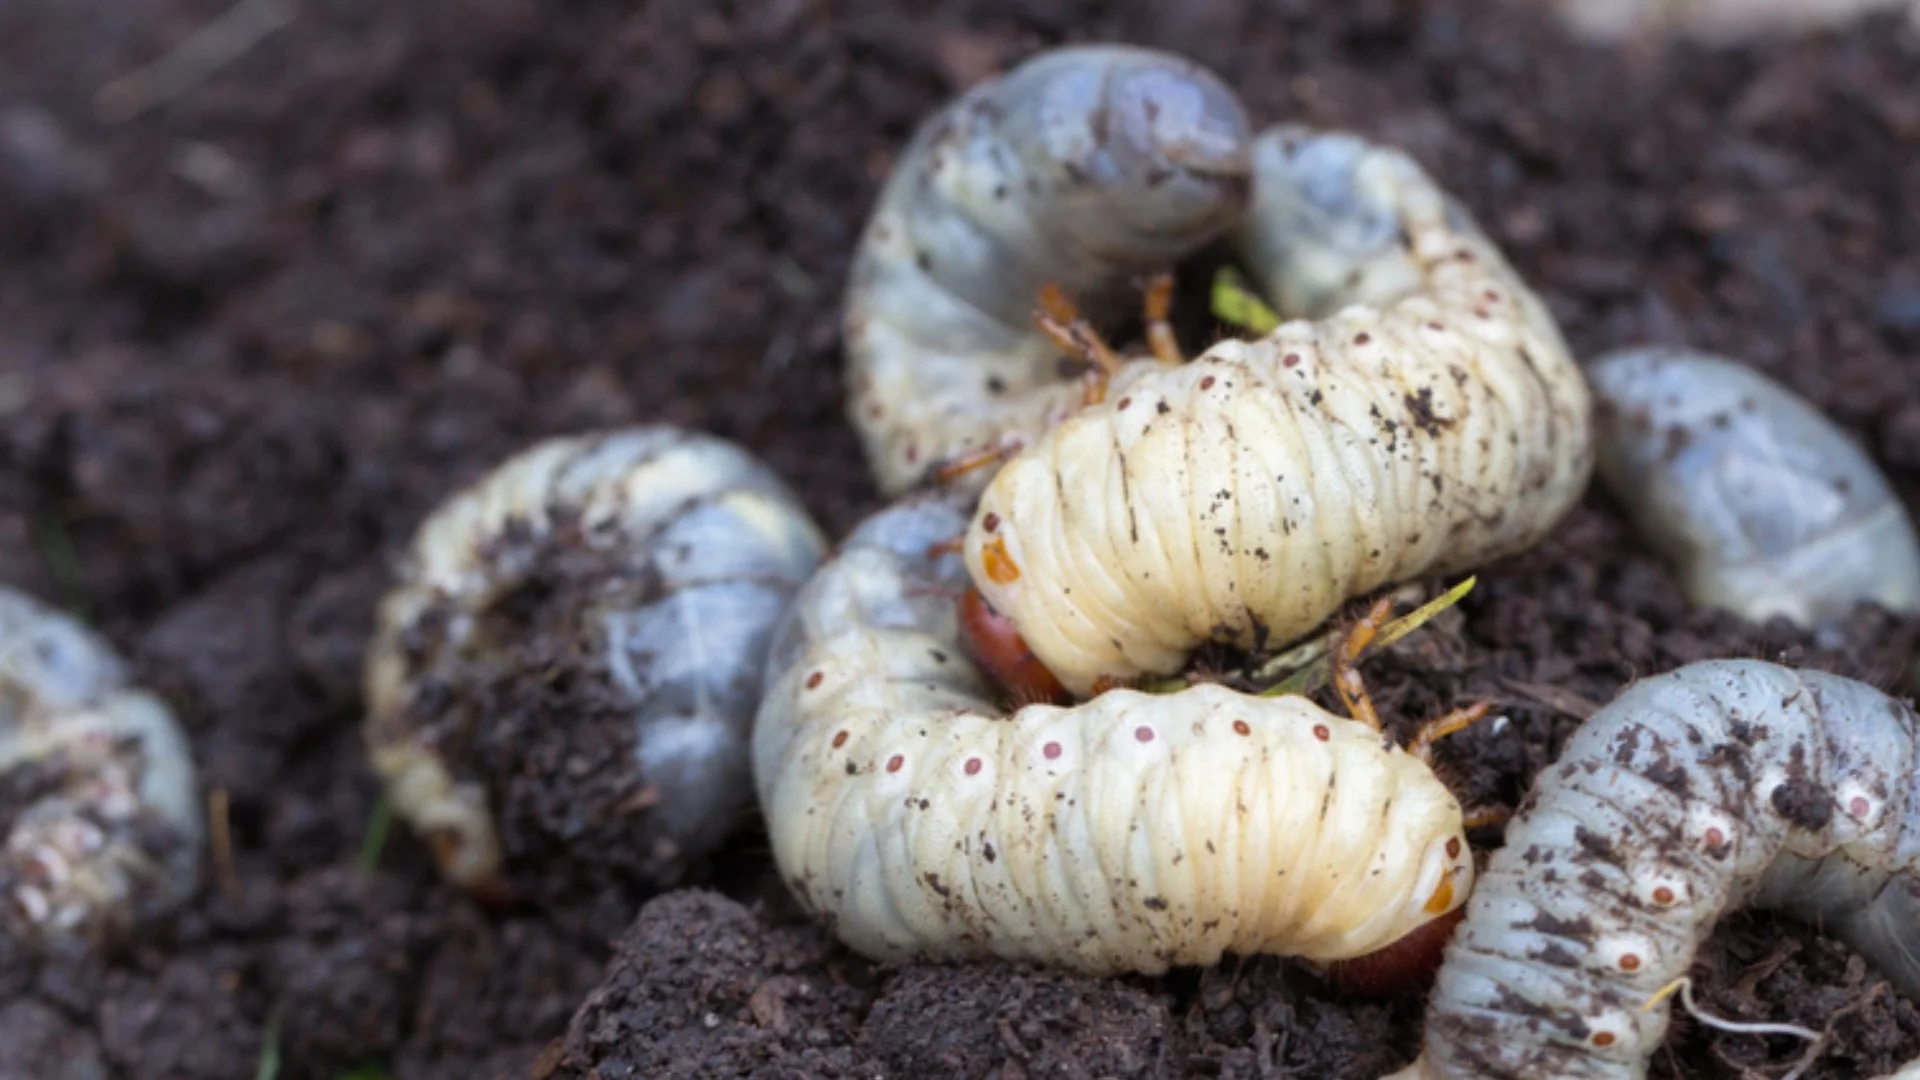 Grubs 101 - What to Know About These Insects & How to Protect Your Lawn